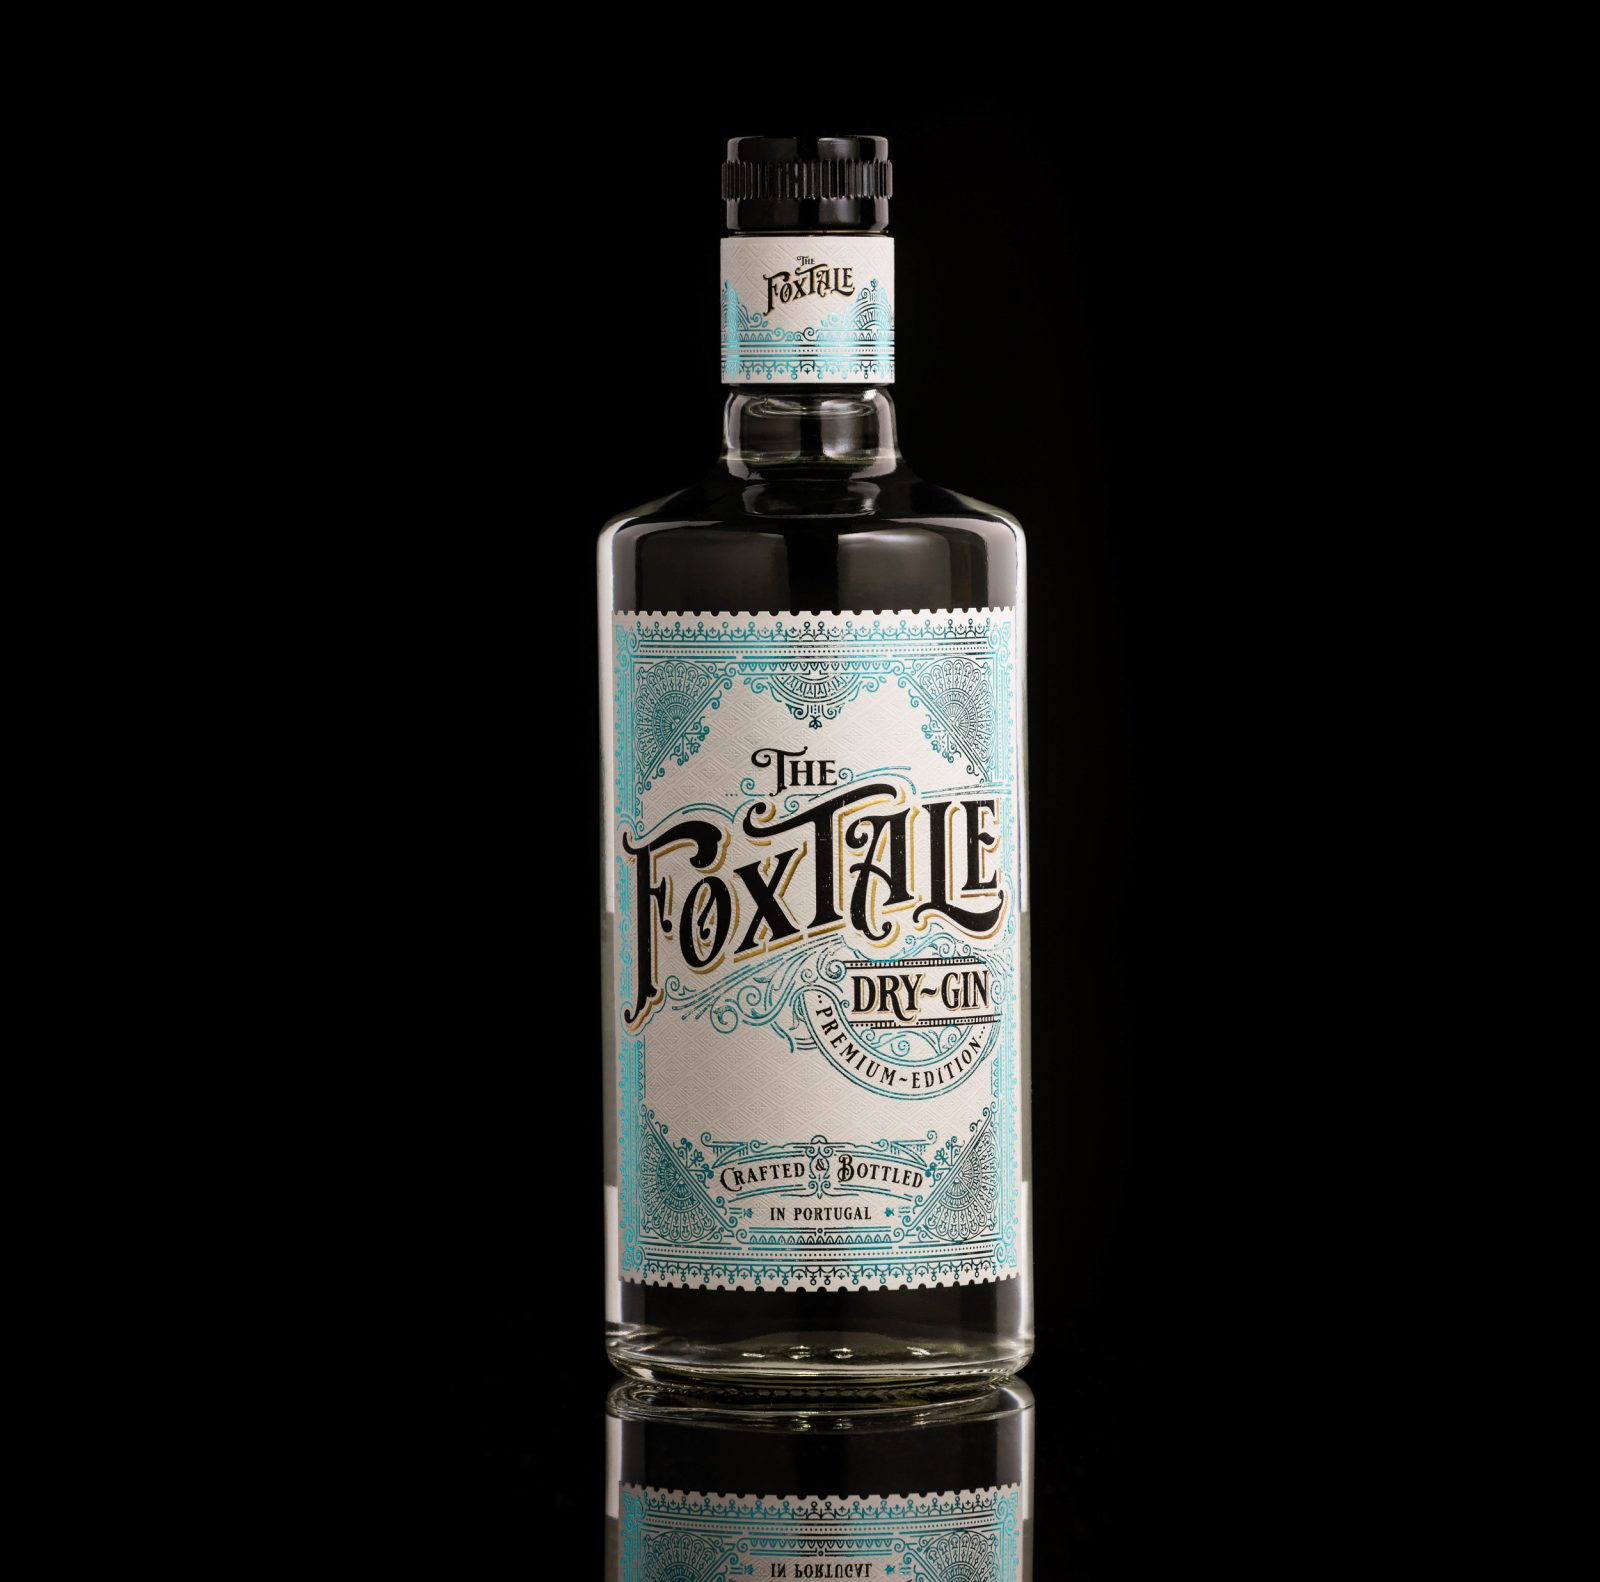 Premium Fresh Looking Gin With a Vintage-Inspired Touch